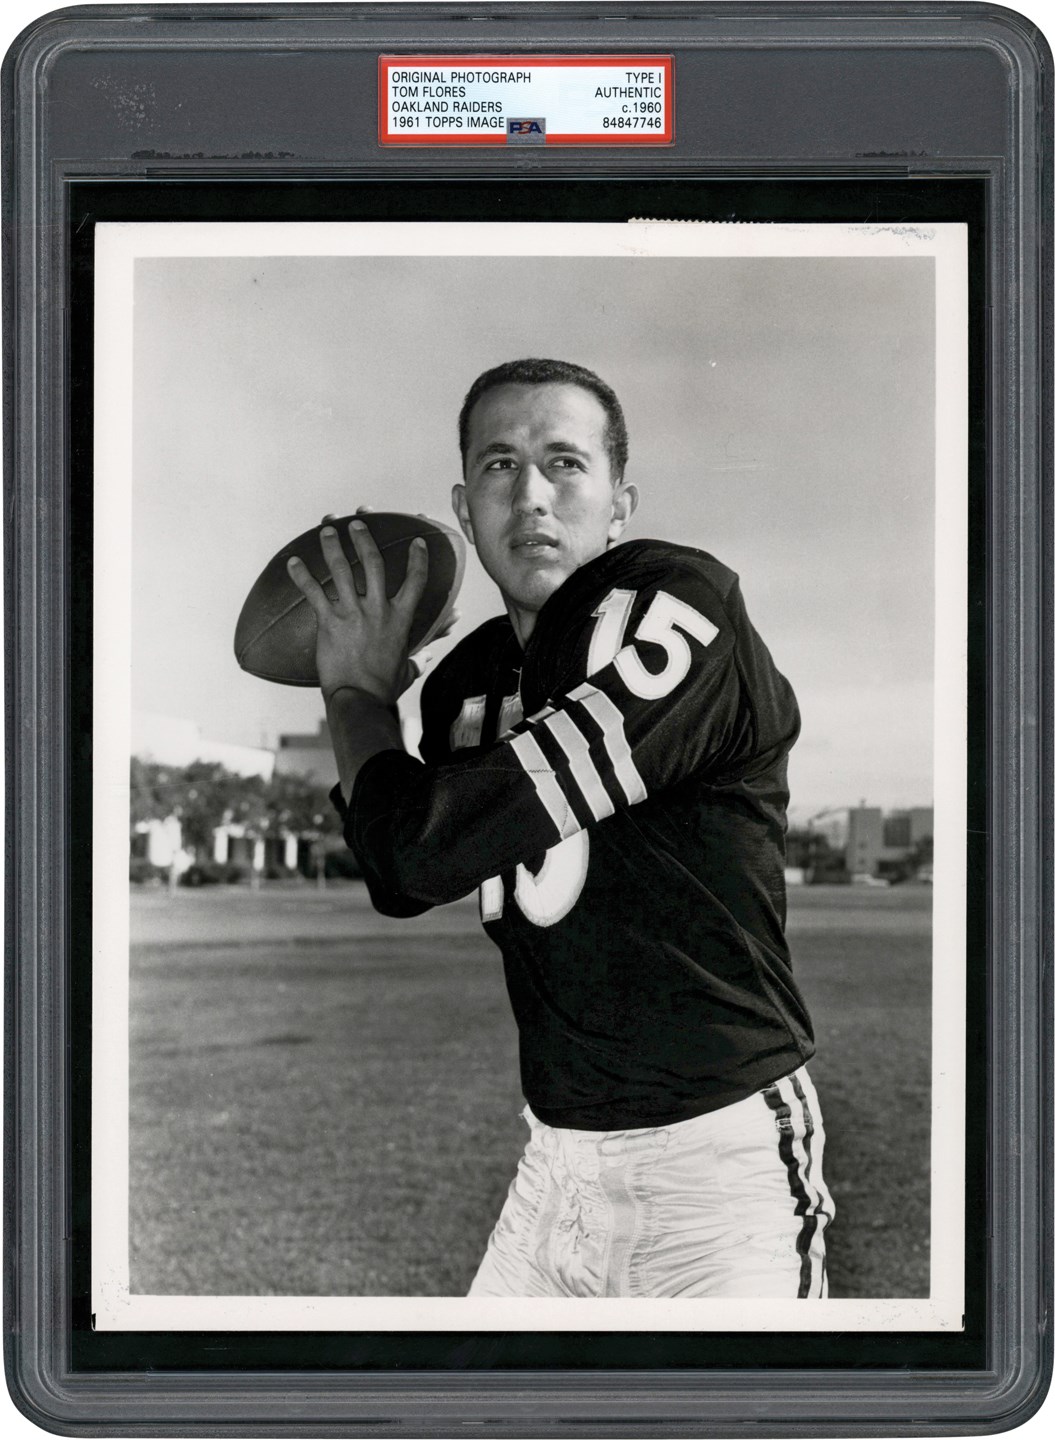 - Tom Flores Original Photograph Used For His 1961 Toops & Fleer Football Cards (PSA Type I)